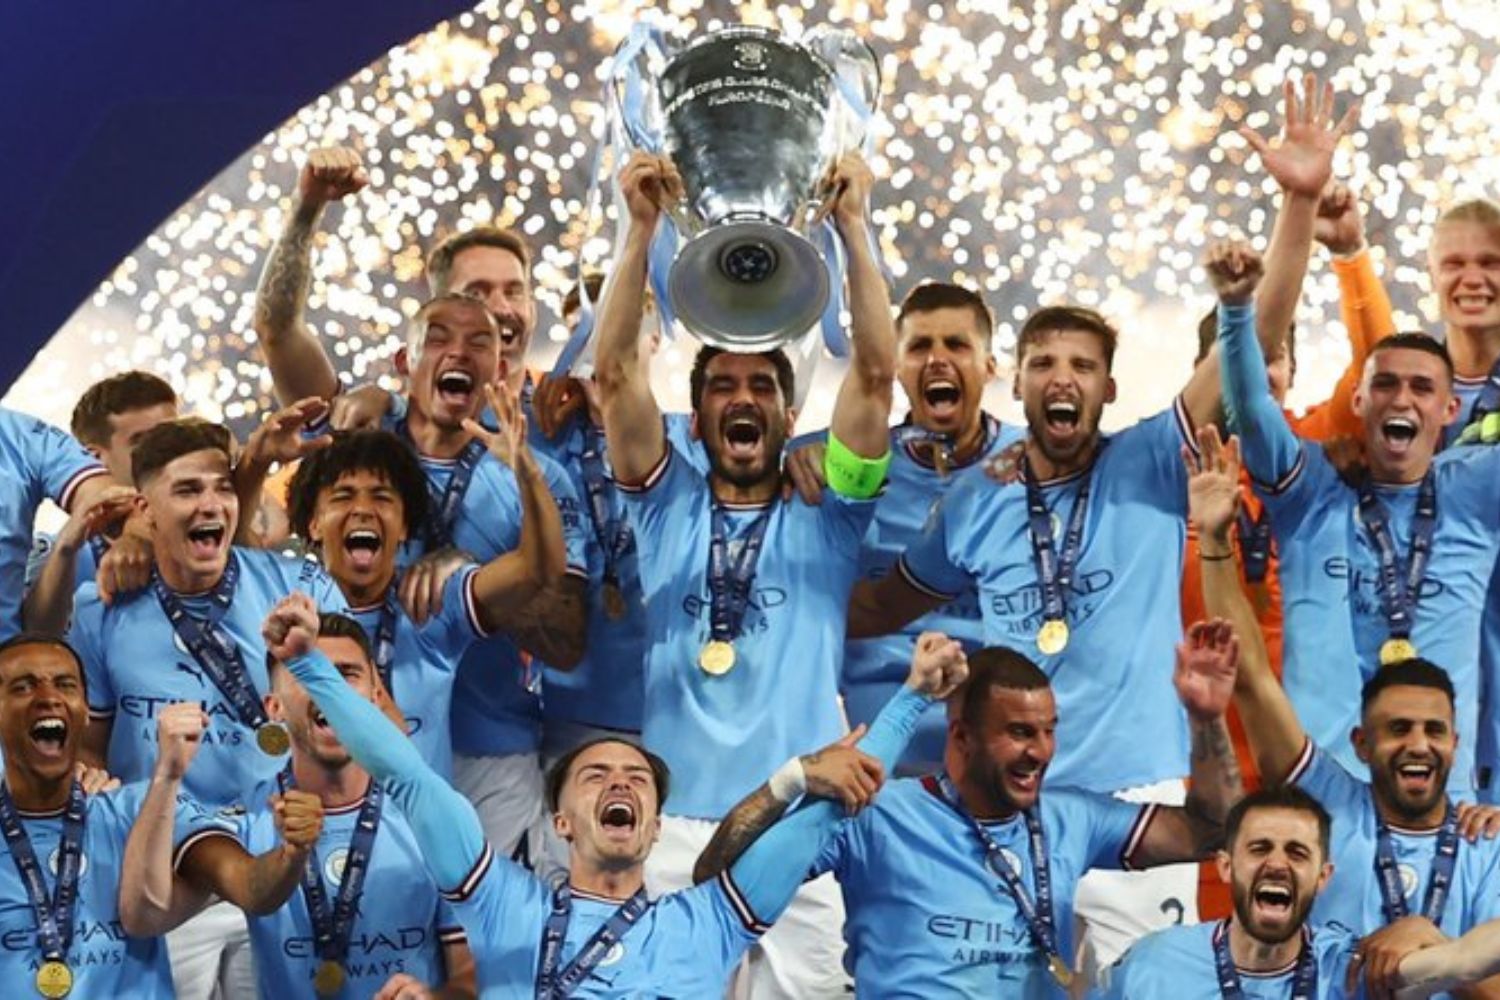 Man City are England’s 4th-most successful side